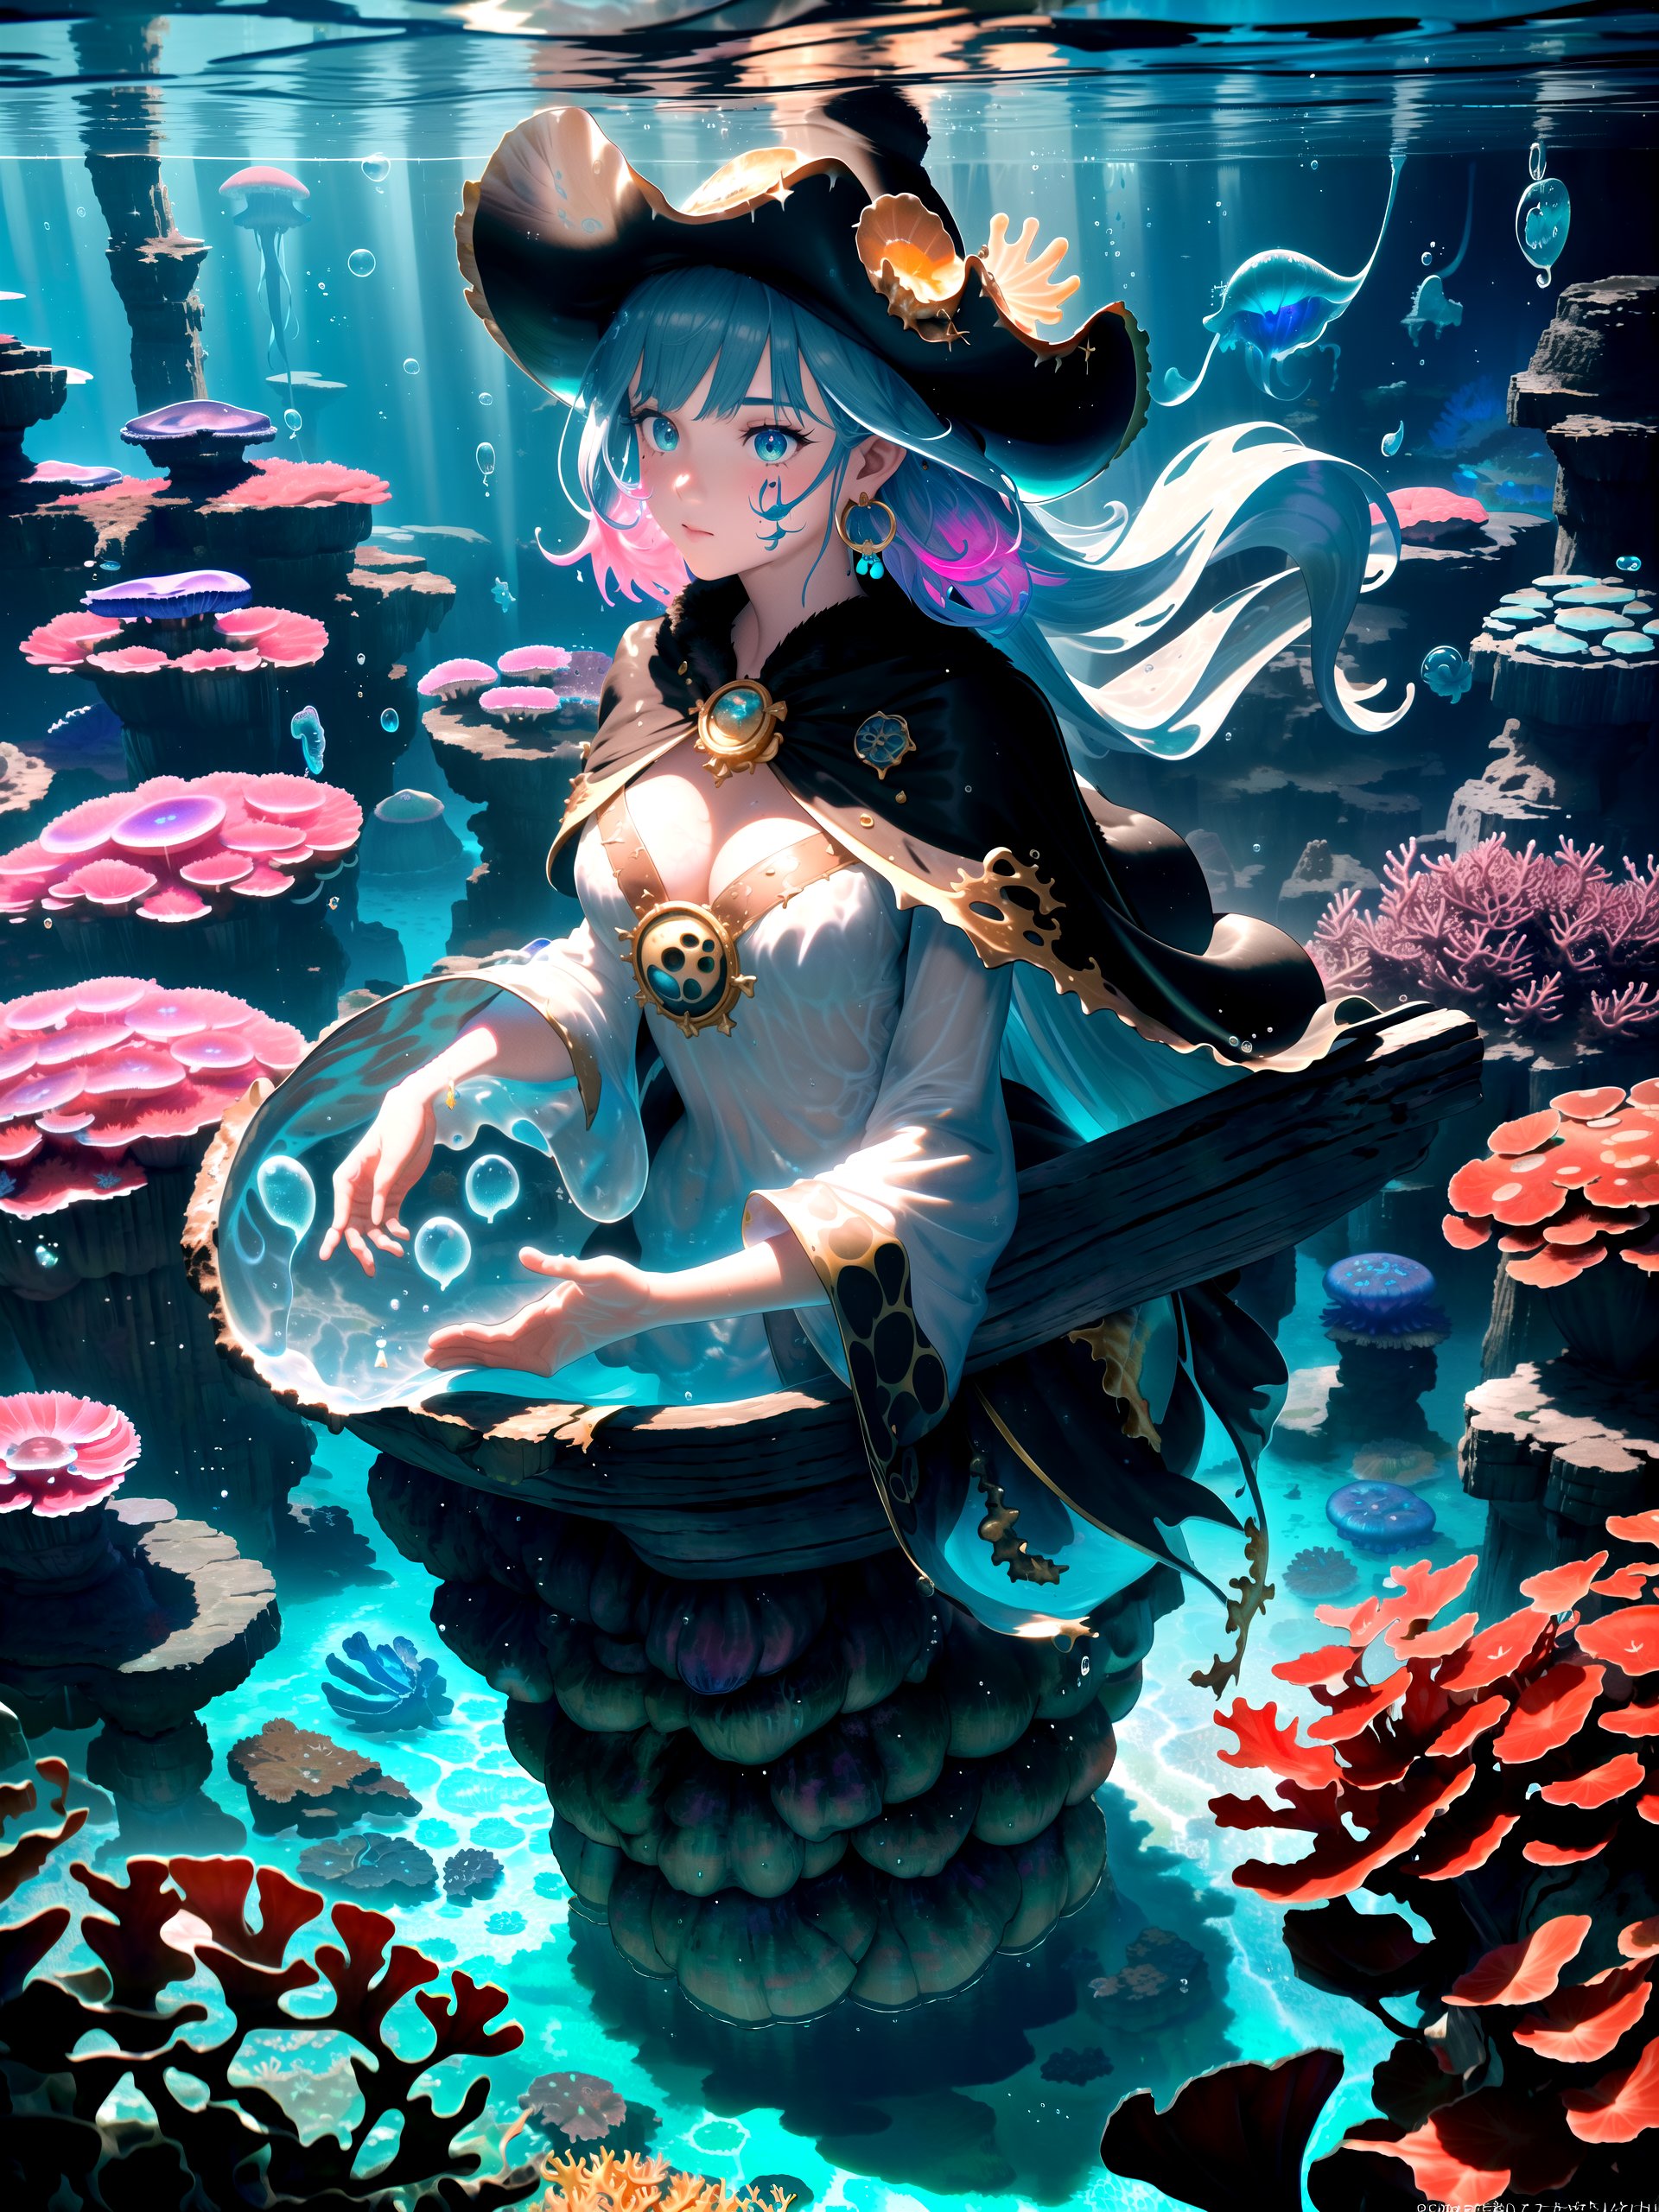 1girl, colossal, facial mark, light particles, depth of field, dark seas, water, underwater, sea foliage foreground, colorful, underwater cave, dripstone, stalactite, stalagmite, pirate hat, buccaneer, fur-trimmed cape, hoop earrings, corals, sea anemone, sea weed, coral reef scenery, golden treasure, golden pile, water caustics, glowing jellyfish, bubbles, treasure chest, from above, close-up,